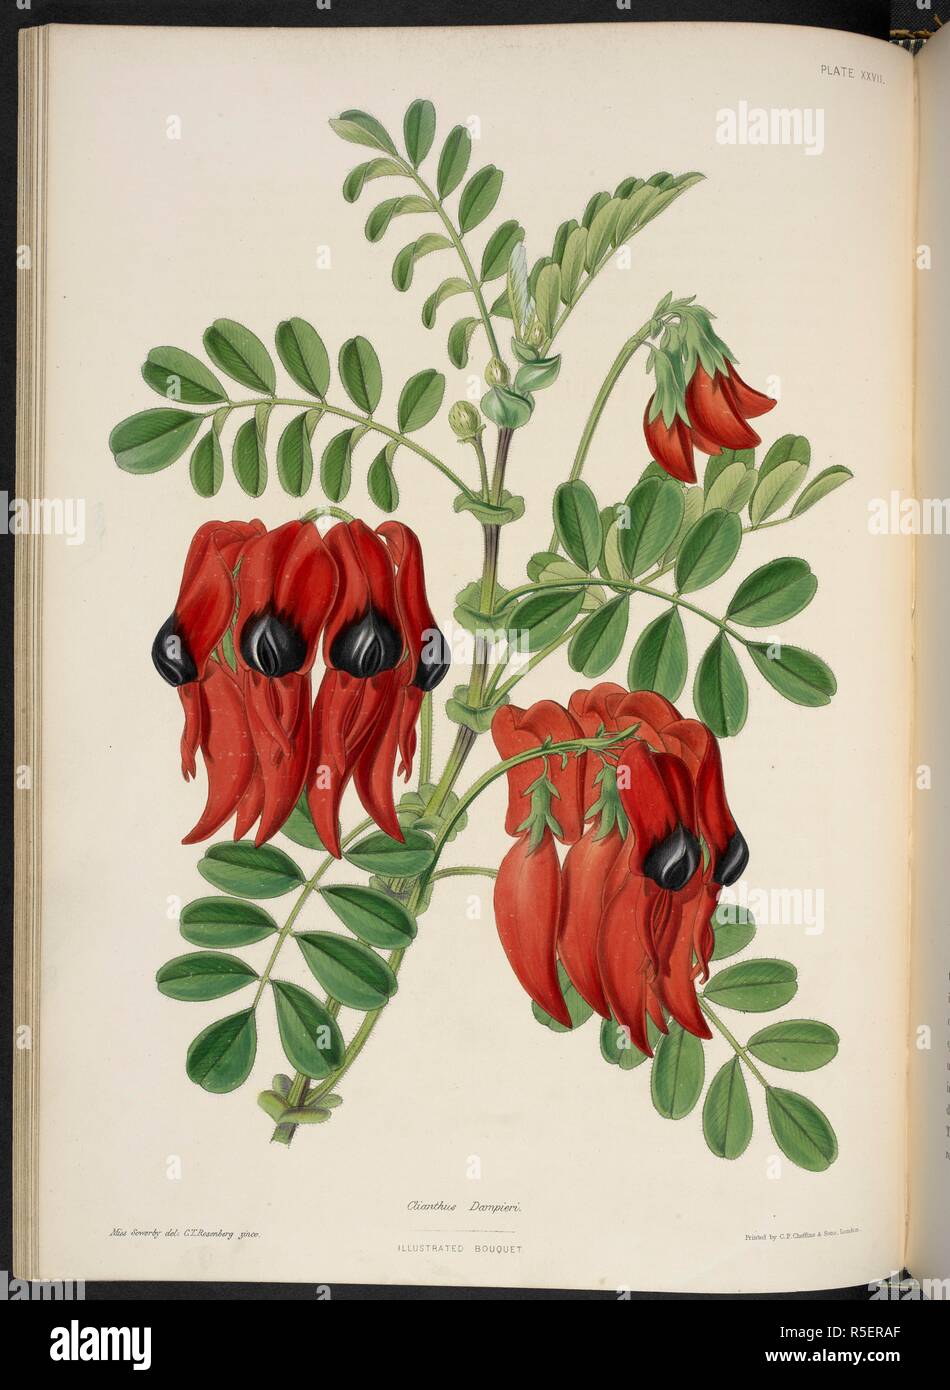 Clianthus dampieri. Clianthus, commonly known as kakabeak. The plants are also known as parrot's beak, parrot's bill and lobster claw. The Illustrated Bouquet, consisting of figures, with descriptions of new flowers. London, 1857-64. Source: 1823.c.13 plate 27. Author: Henderson, Edward George. Sowerby, Miss. Stock Photo